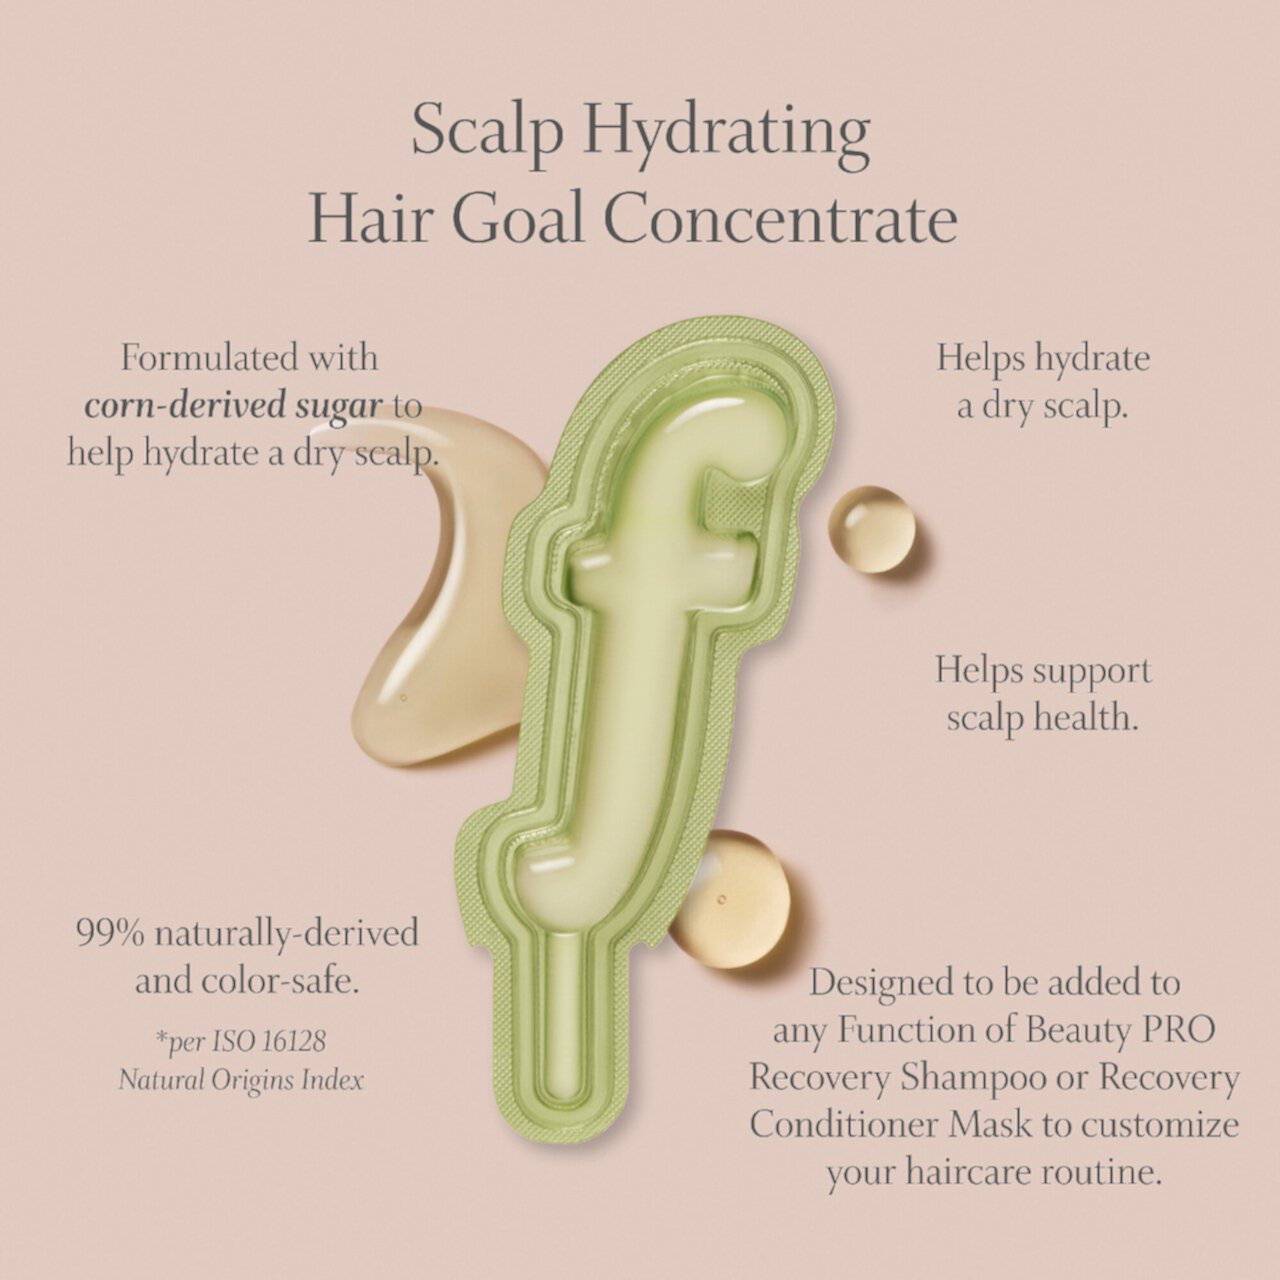 The Hydration Pro Dry Scalp Treatment Goal Concentrate Mix-In Function of Beauty PRO